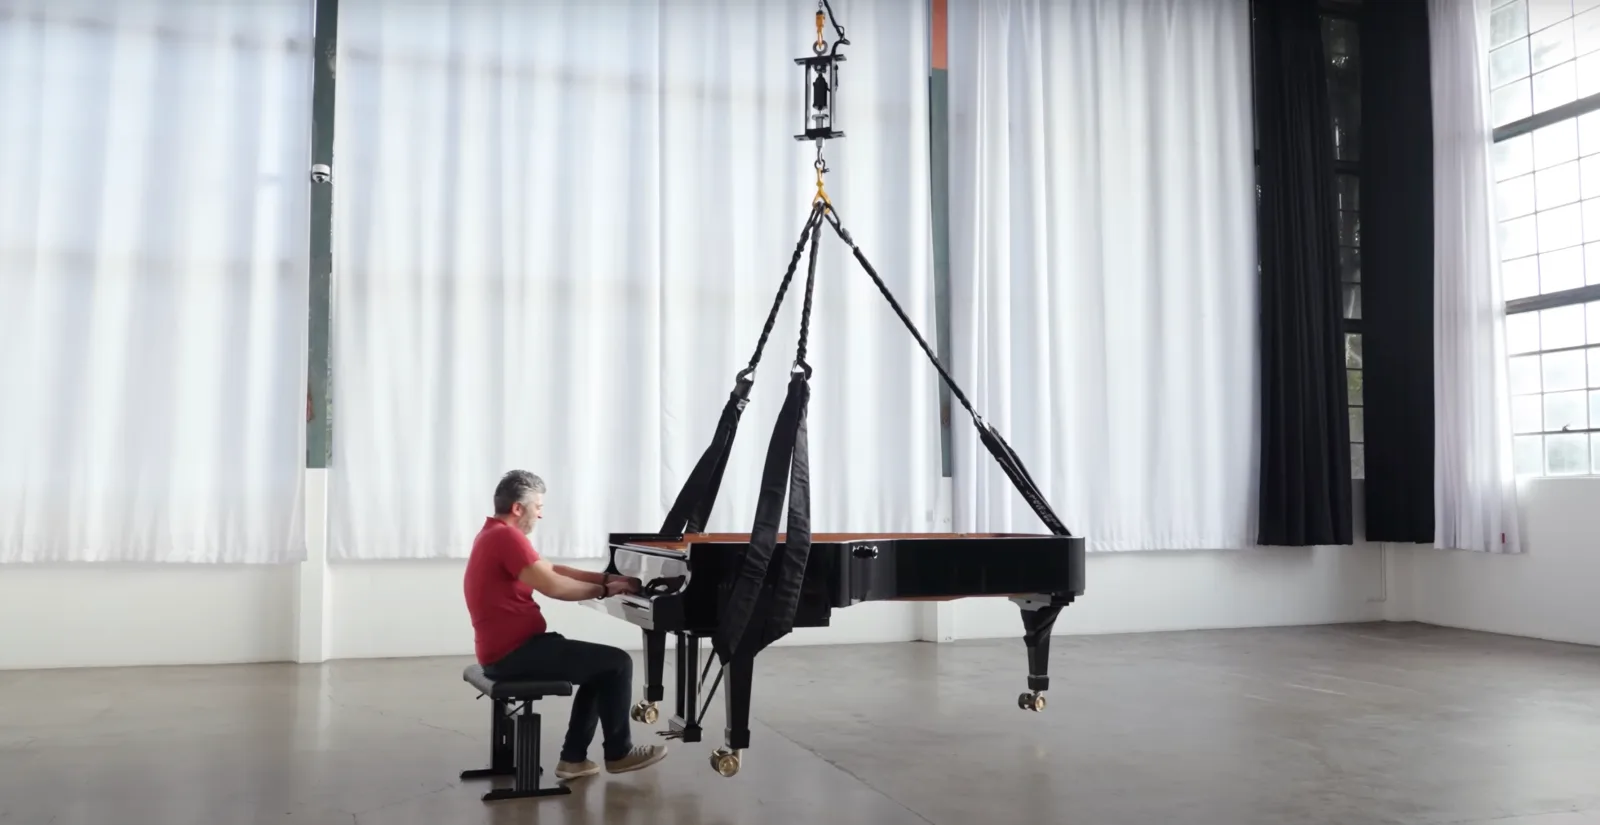 Tesla Optimus Leg Actuator Lifts Whole Piano! How Potent This Robot Is